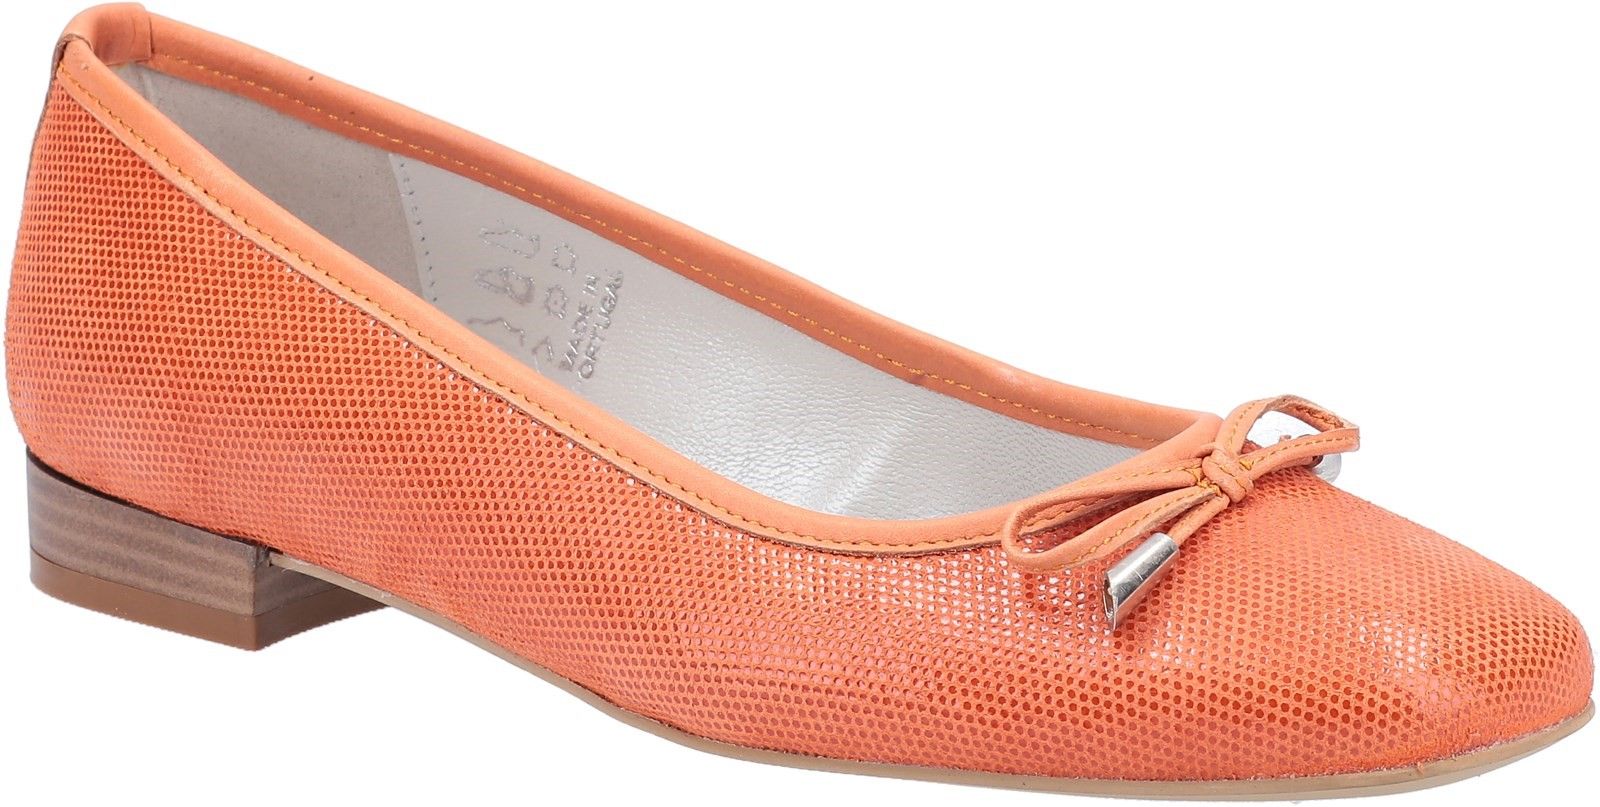 Riva Llafranc is a womens elegant slip on ballerina with decorative bow and toggle trim and square toe shape. It has soft printed suede leather uppers with contrast smooth leather topline and heel trim and a lightly padded leather covered footbed.